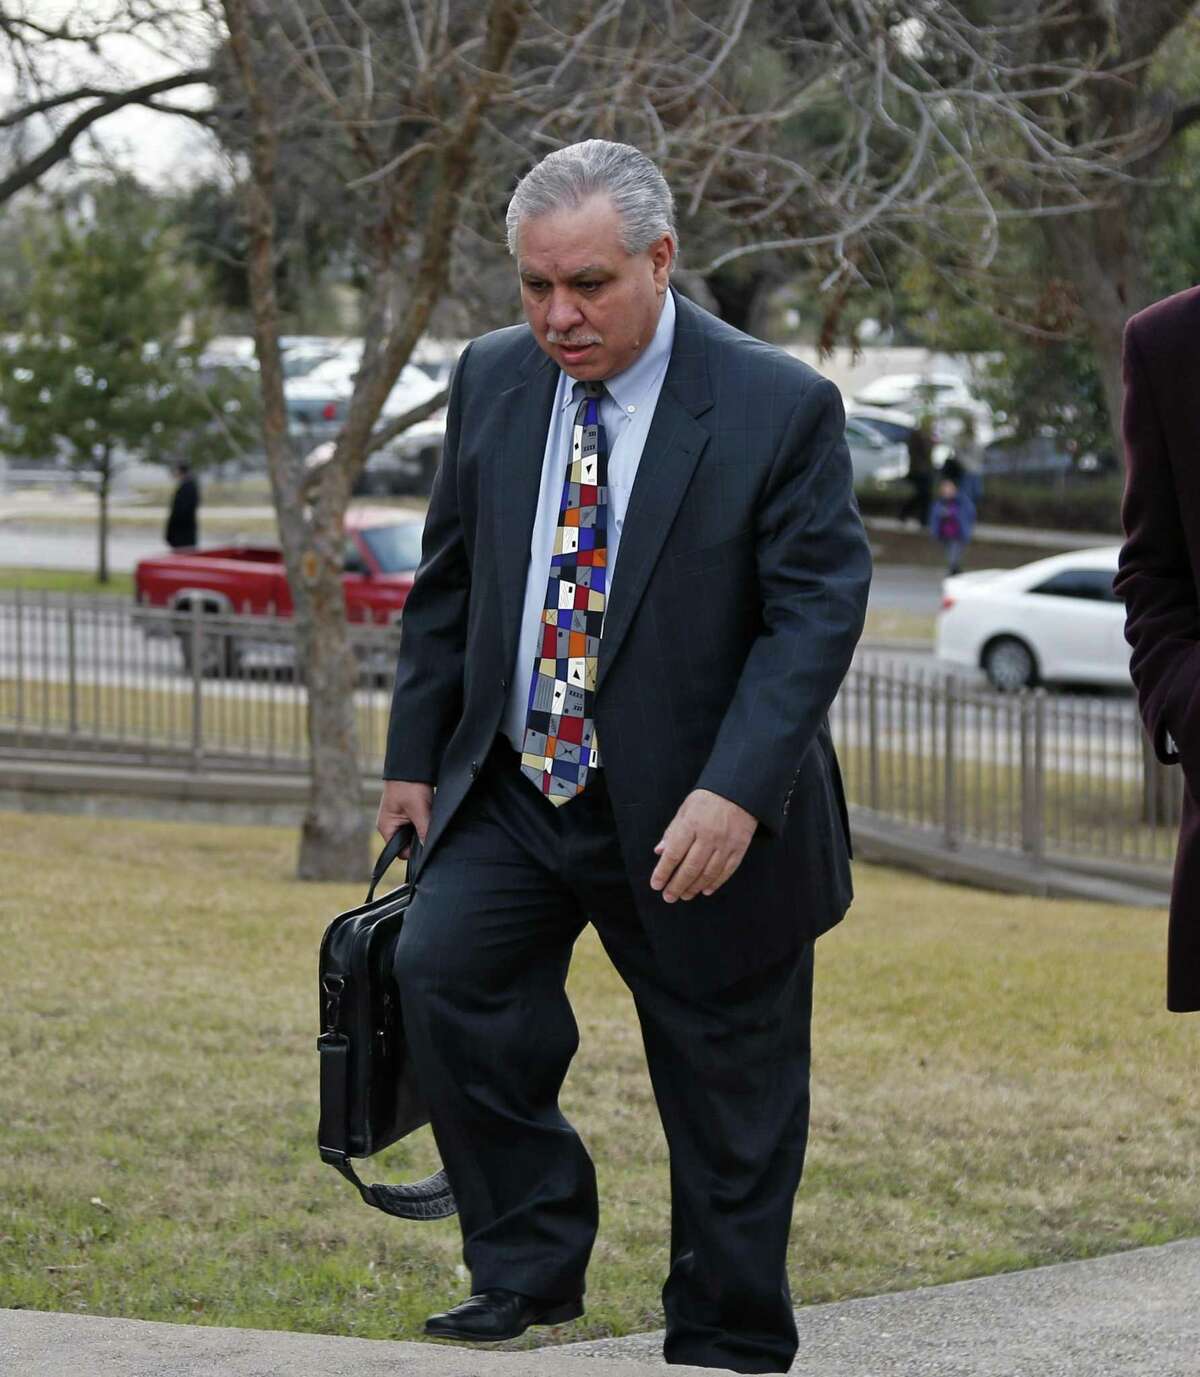 Gary Cain arrives at the John H. Wood Jr. Federal Courthouse for jury selection in his trial with co-defendant. Sen. Carlos Uresti on Thursday, January 18, 2018 in San Antonio, Texas.